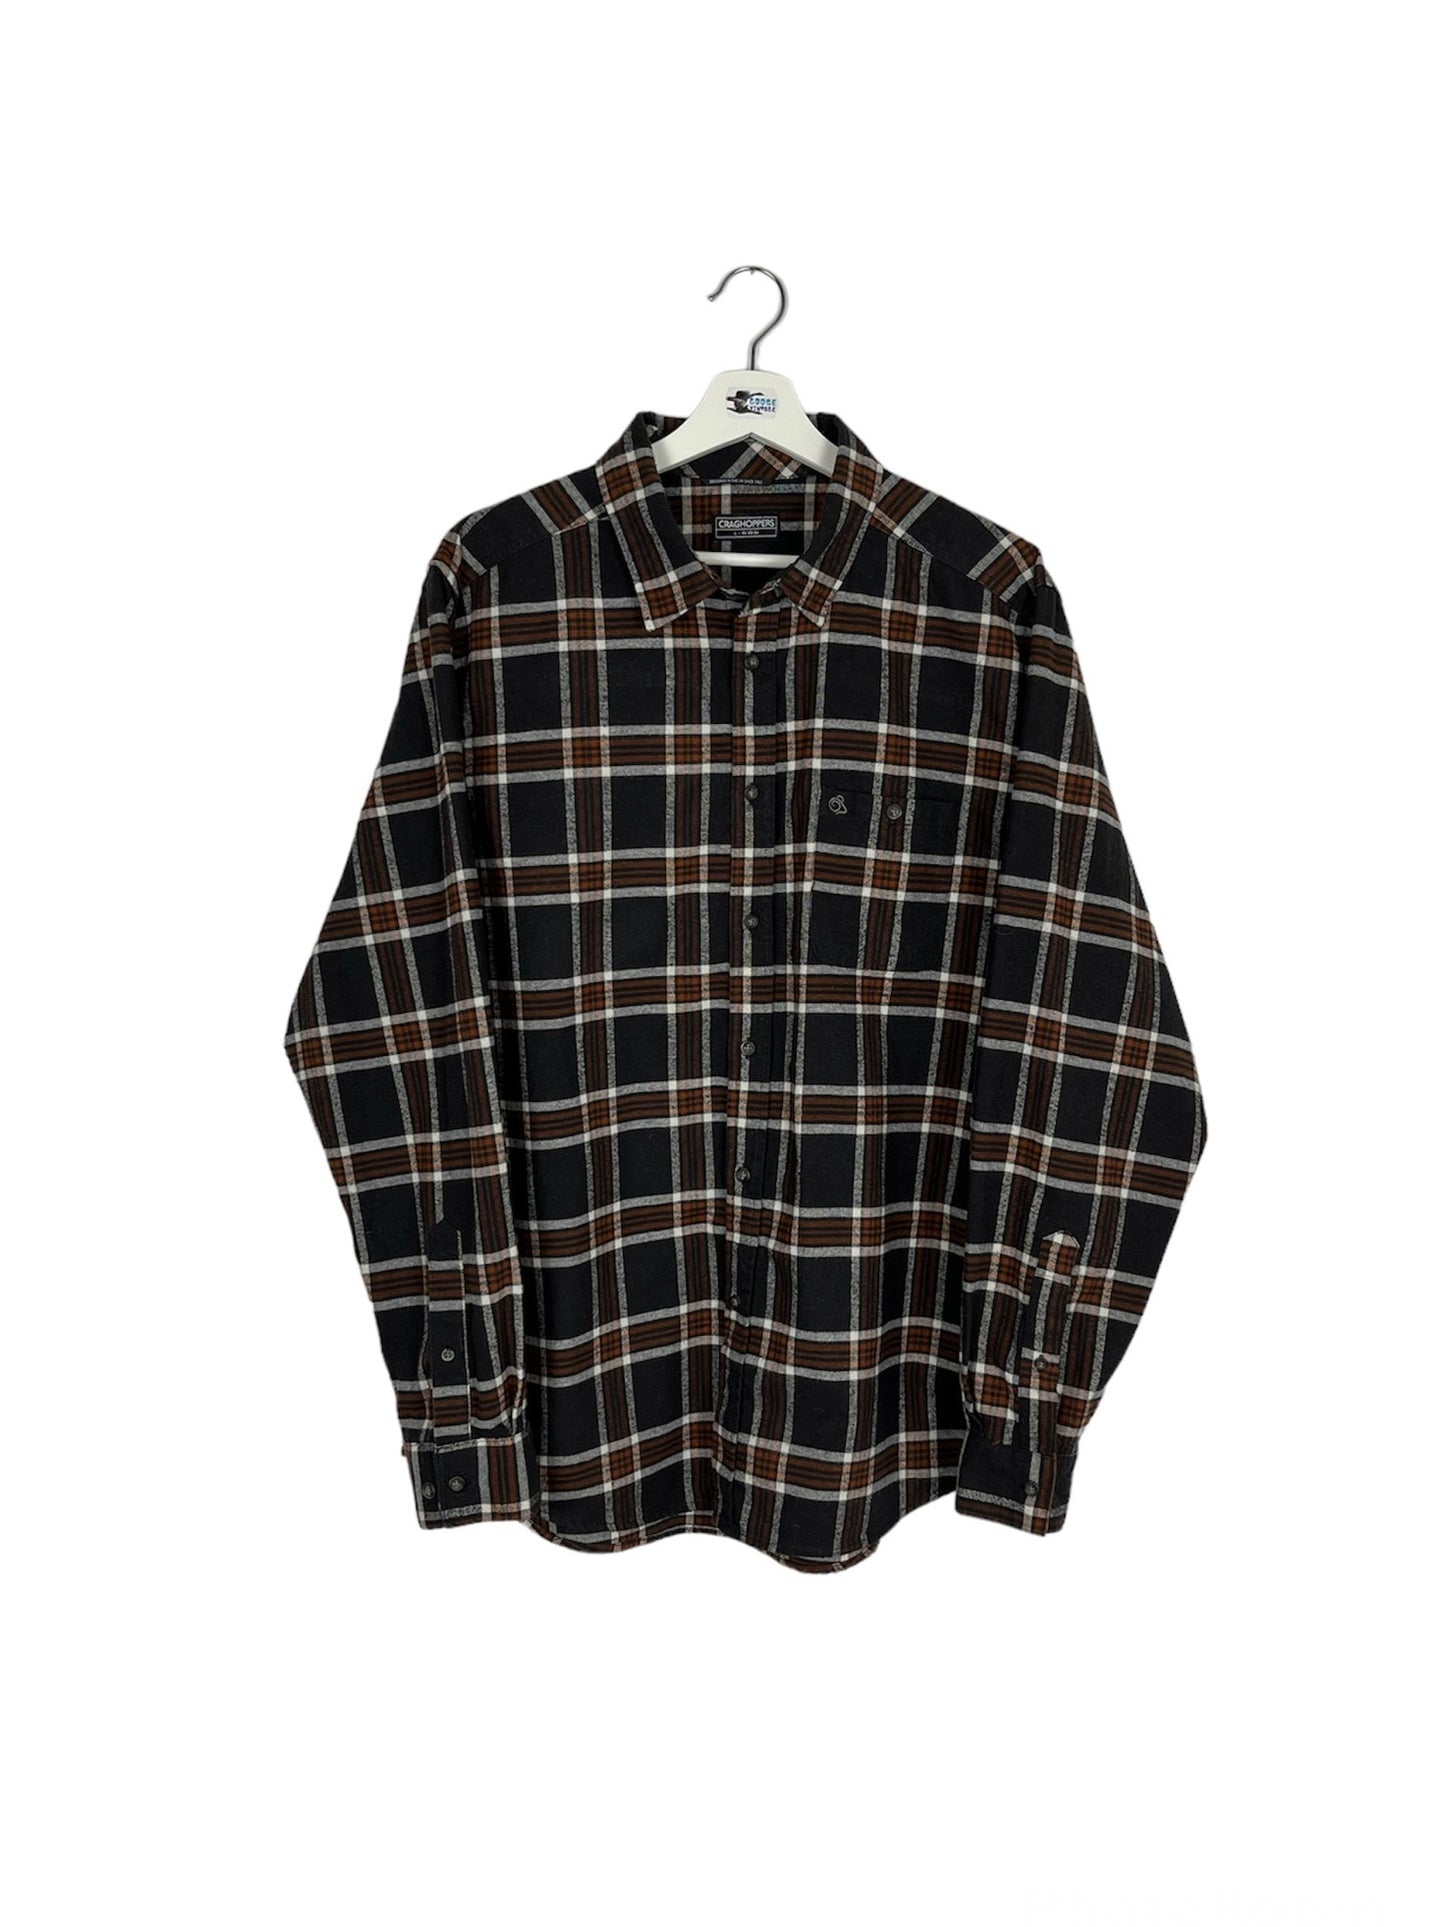 Craghoppers Flannel Shirt - Large